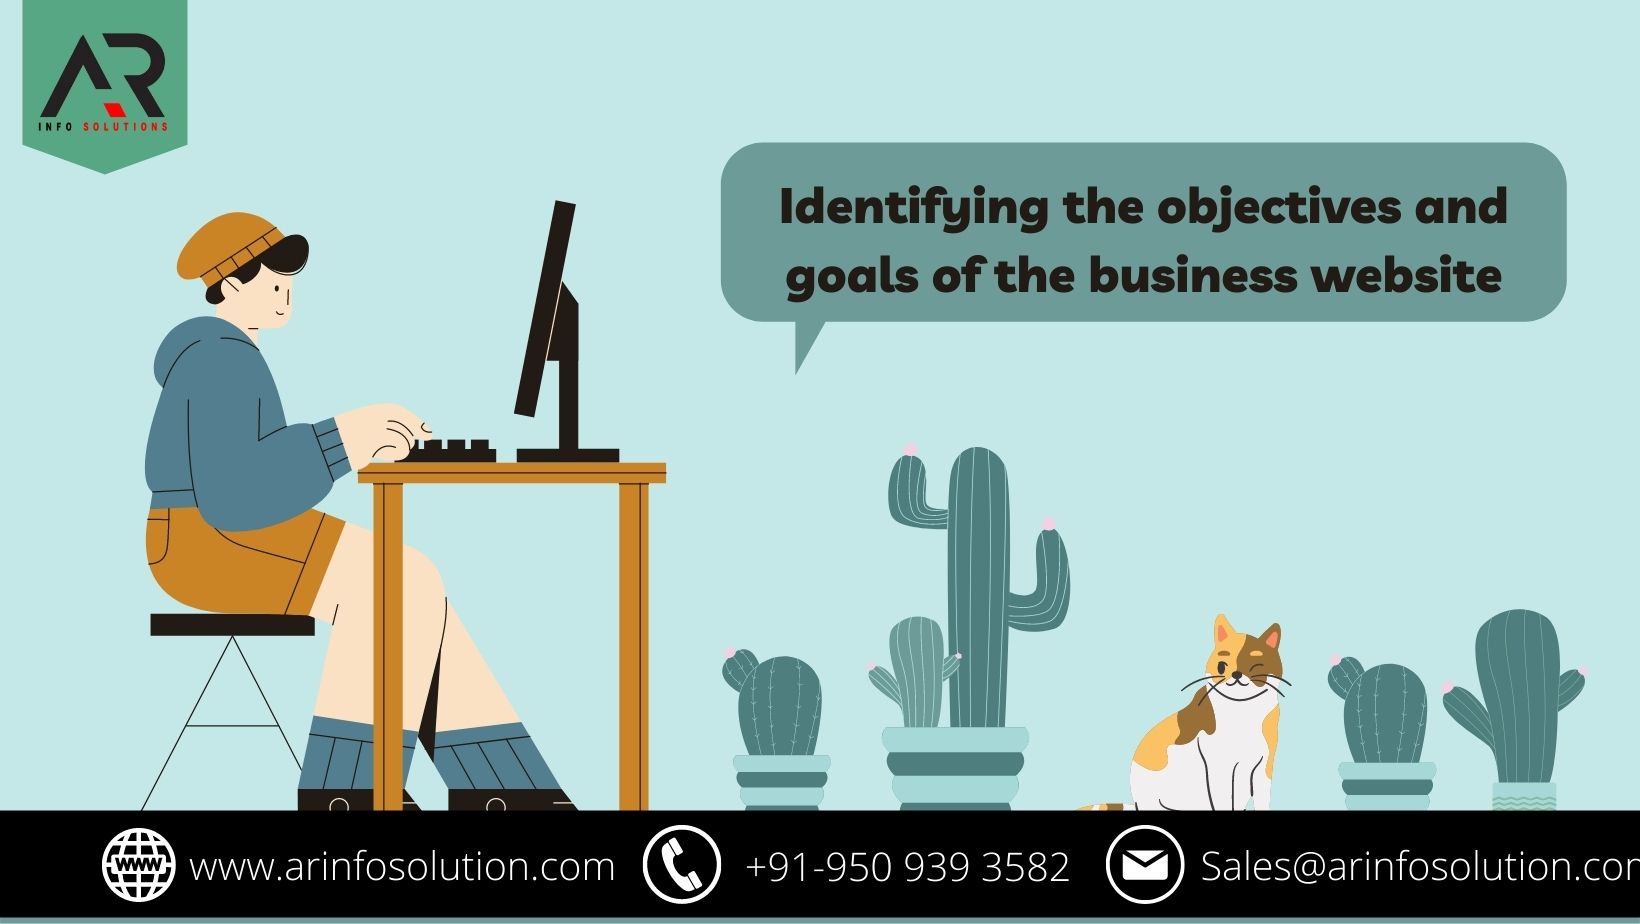 Identifying the objectives and goals of the business website